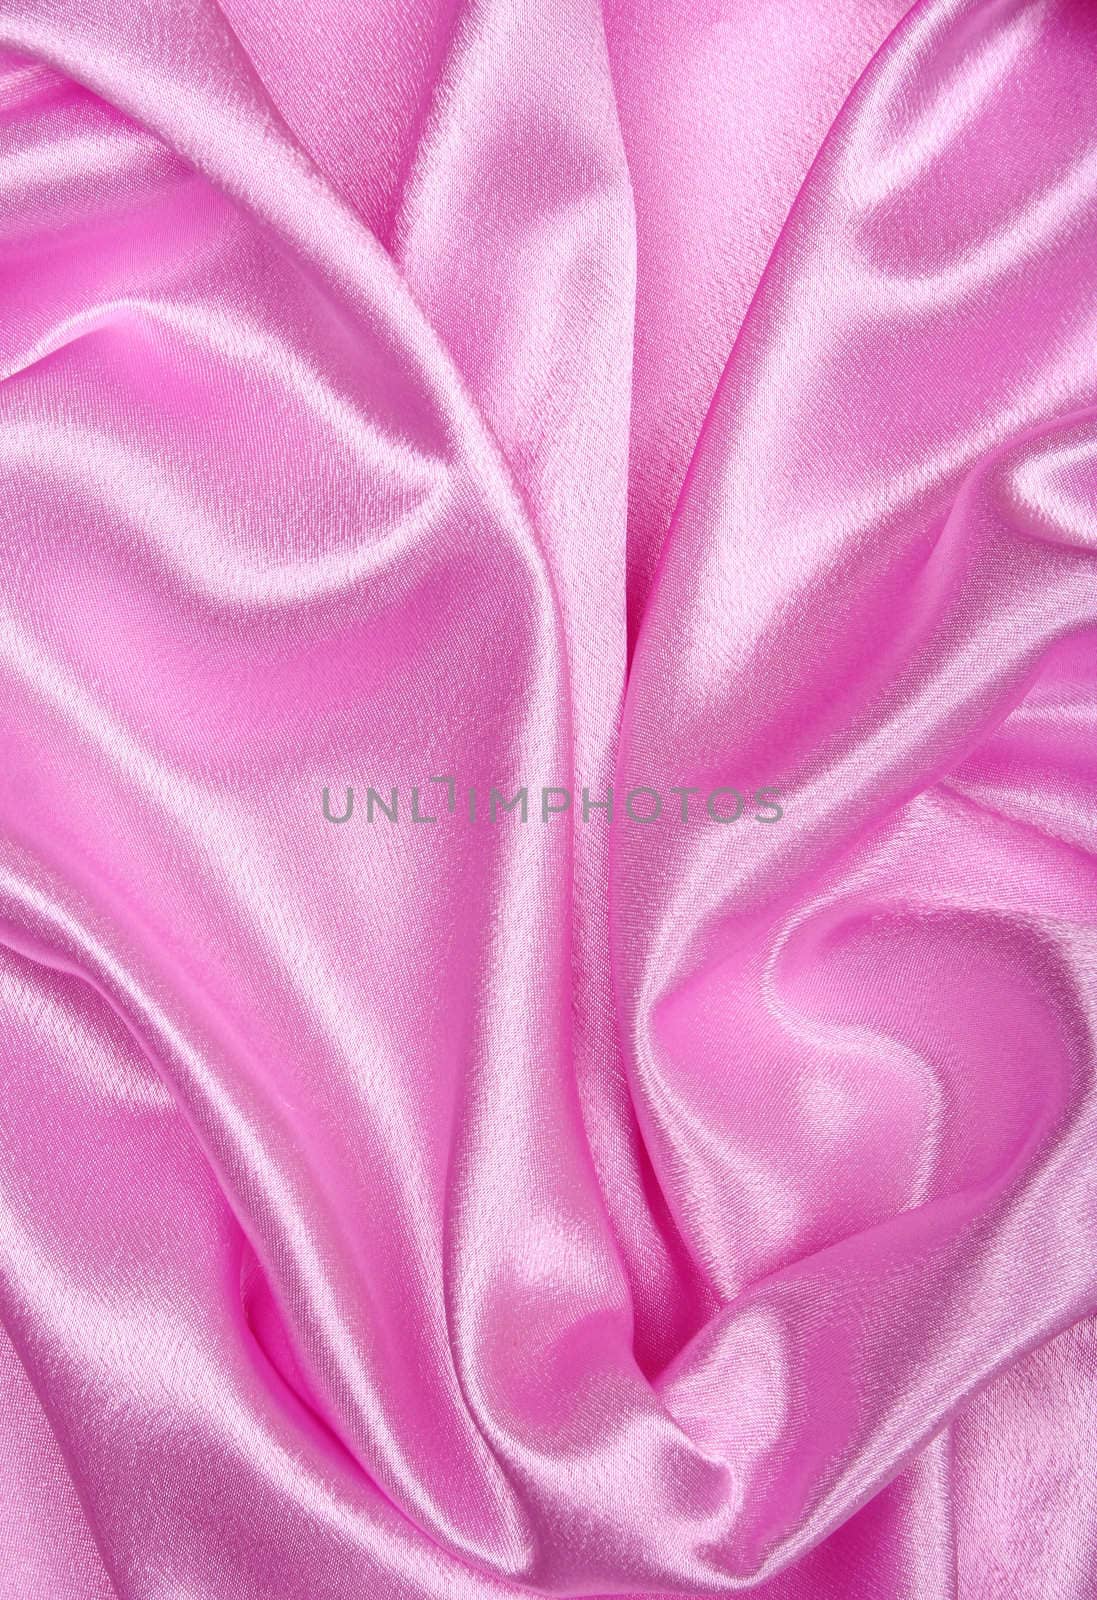 Smooth elegant pink silk as background  by oxanatravel